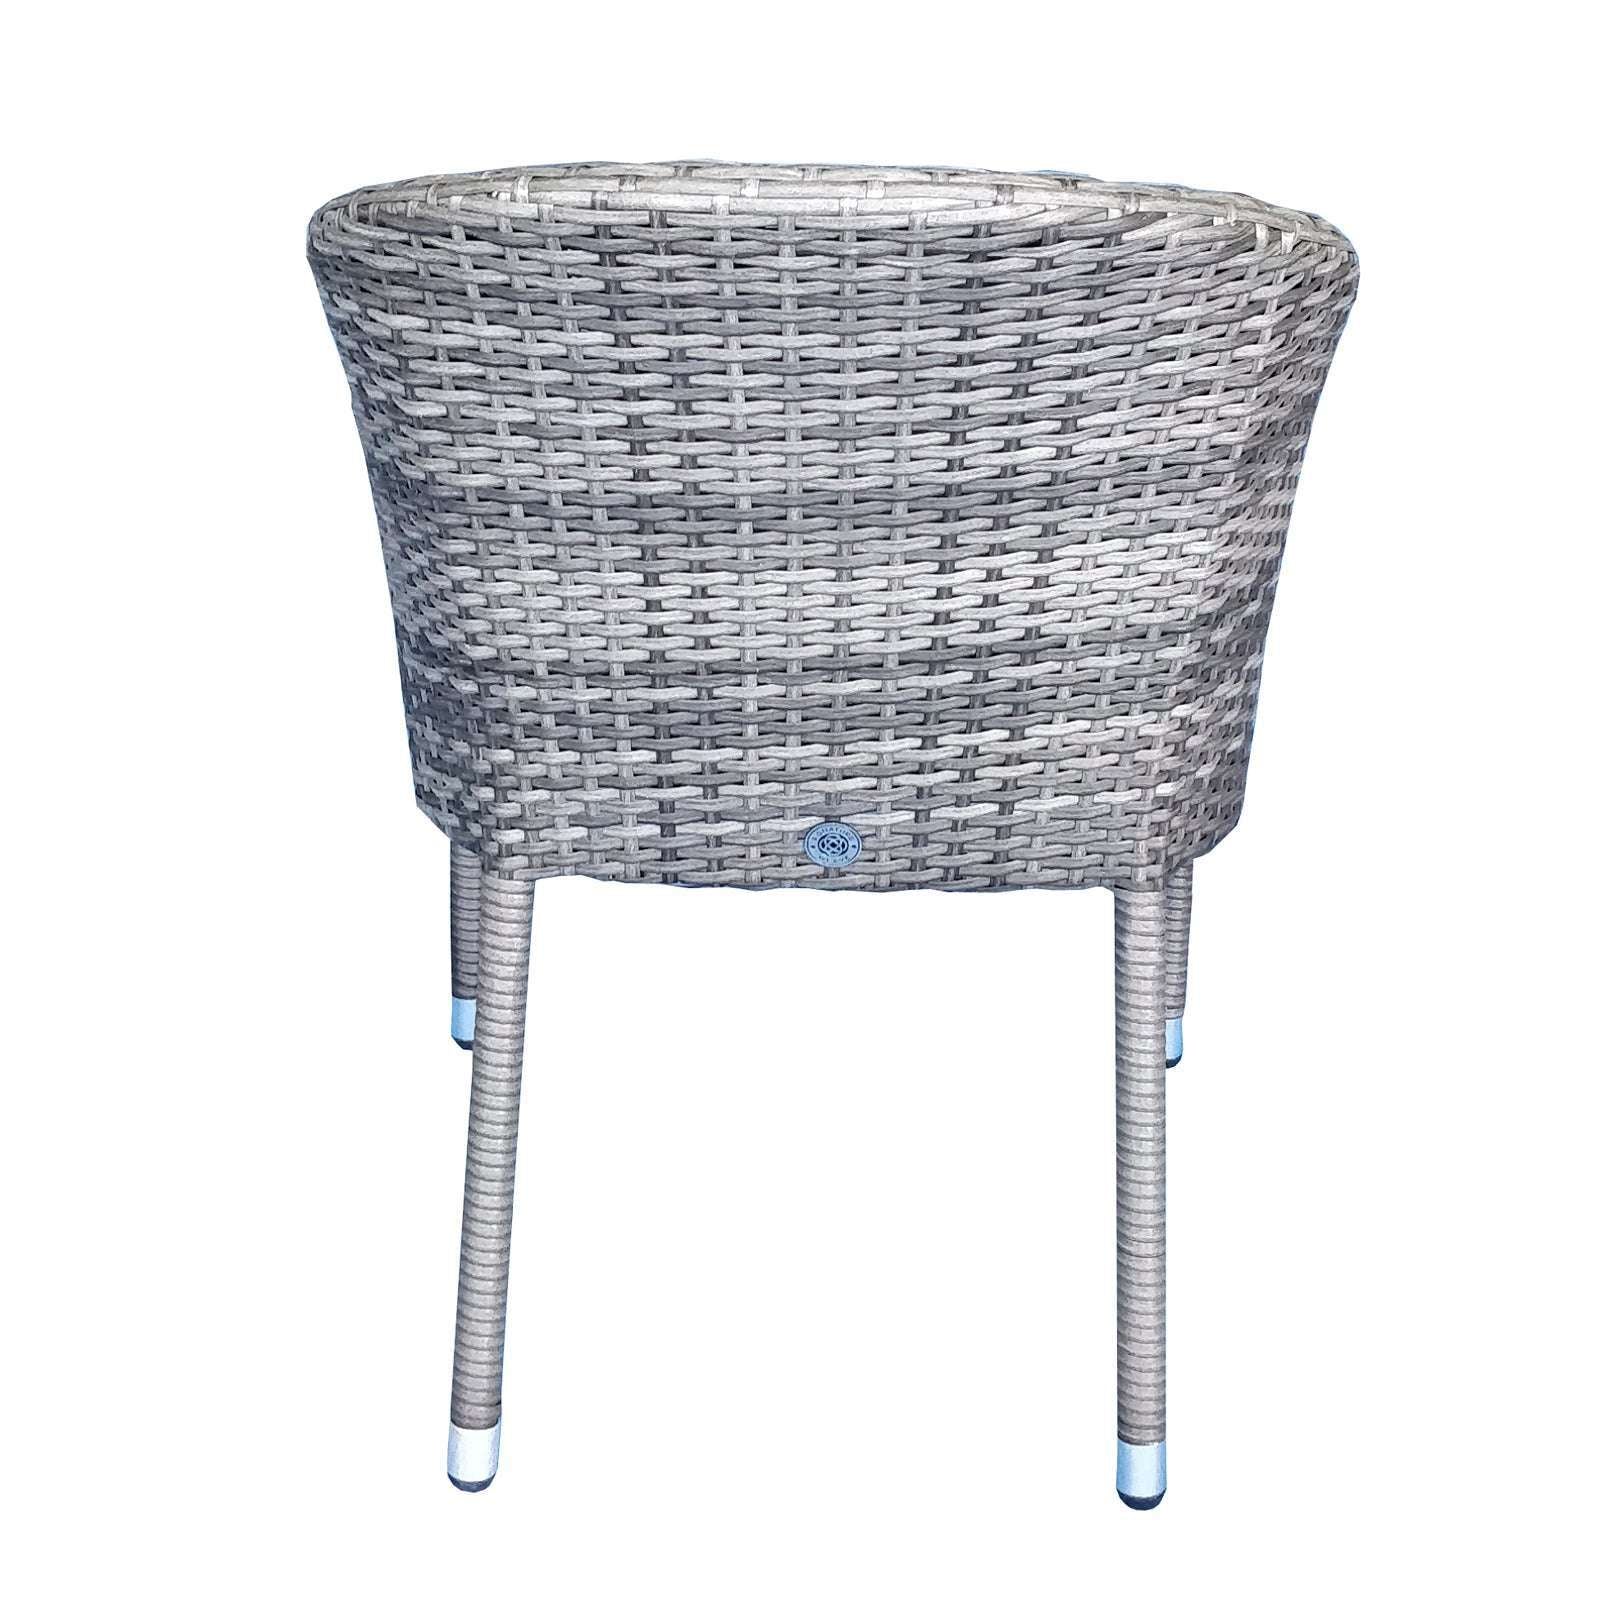 Exceptional Garden:Signature Weave Emily Stacking Chairs